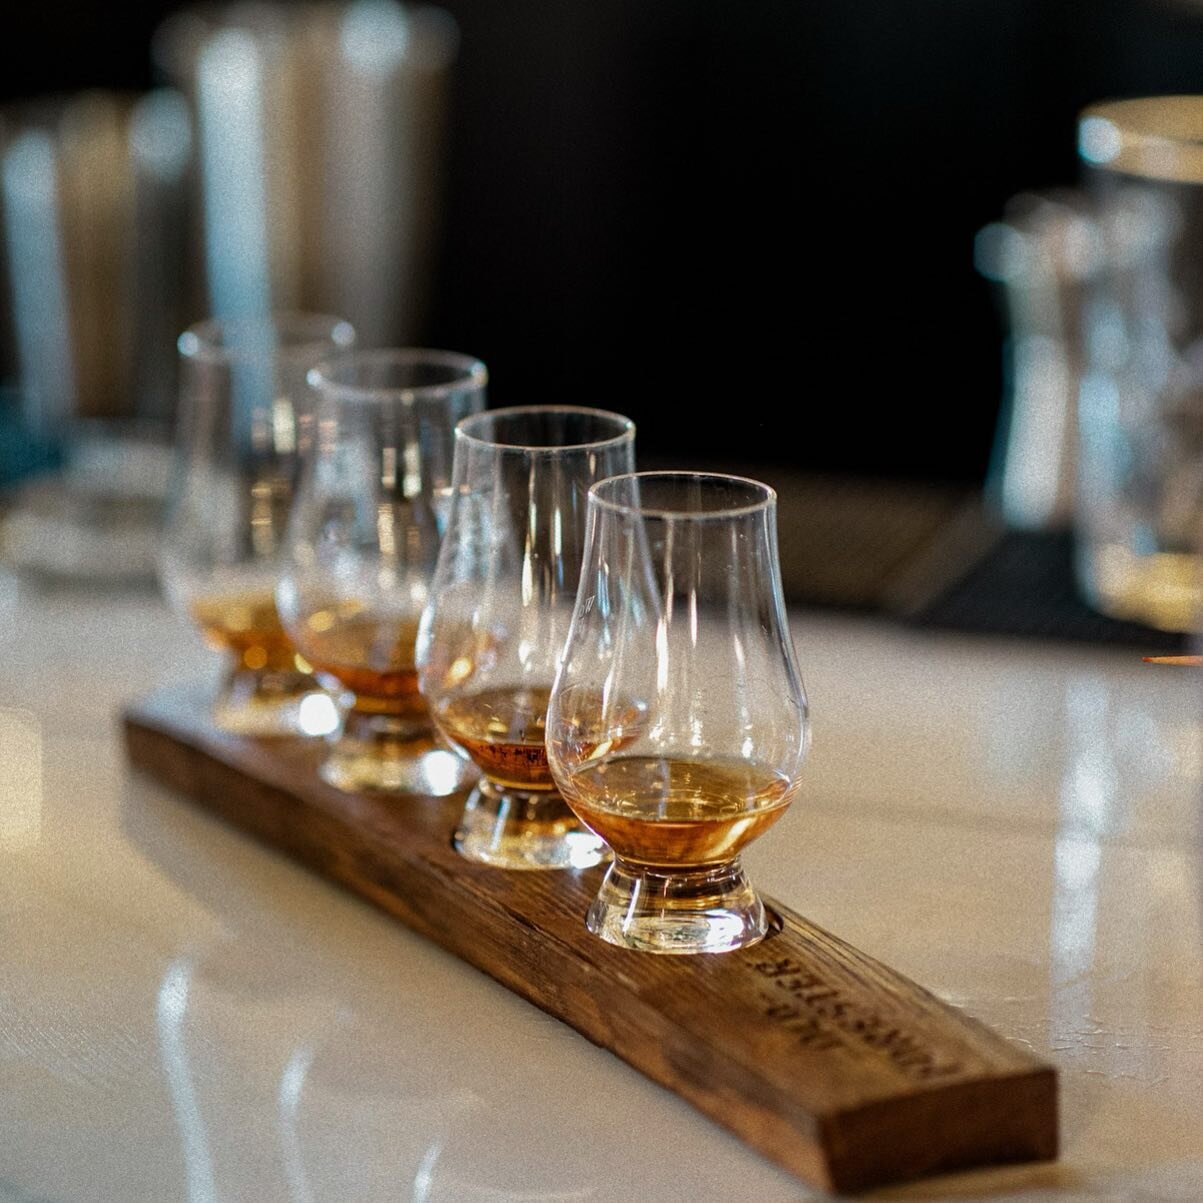 Come join us tonight for National Bourbon Day. We are offering our own version of the Kentucky Bourbon Trail with a flight featuring some of our favorites. 

Peerless Bourbon - On June 22, 2019 Peerless just rereleased their bourbon for the first tim